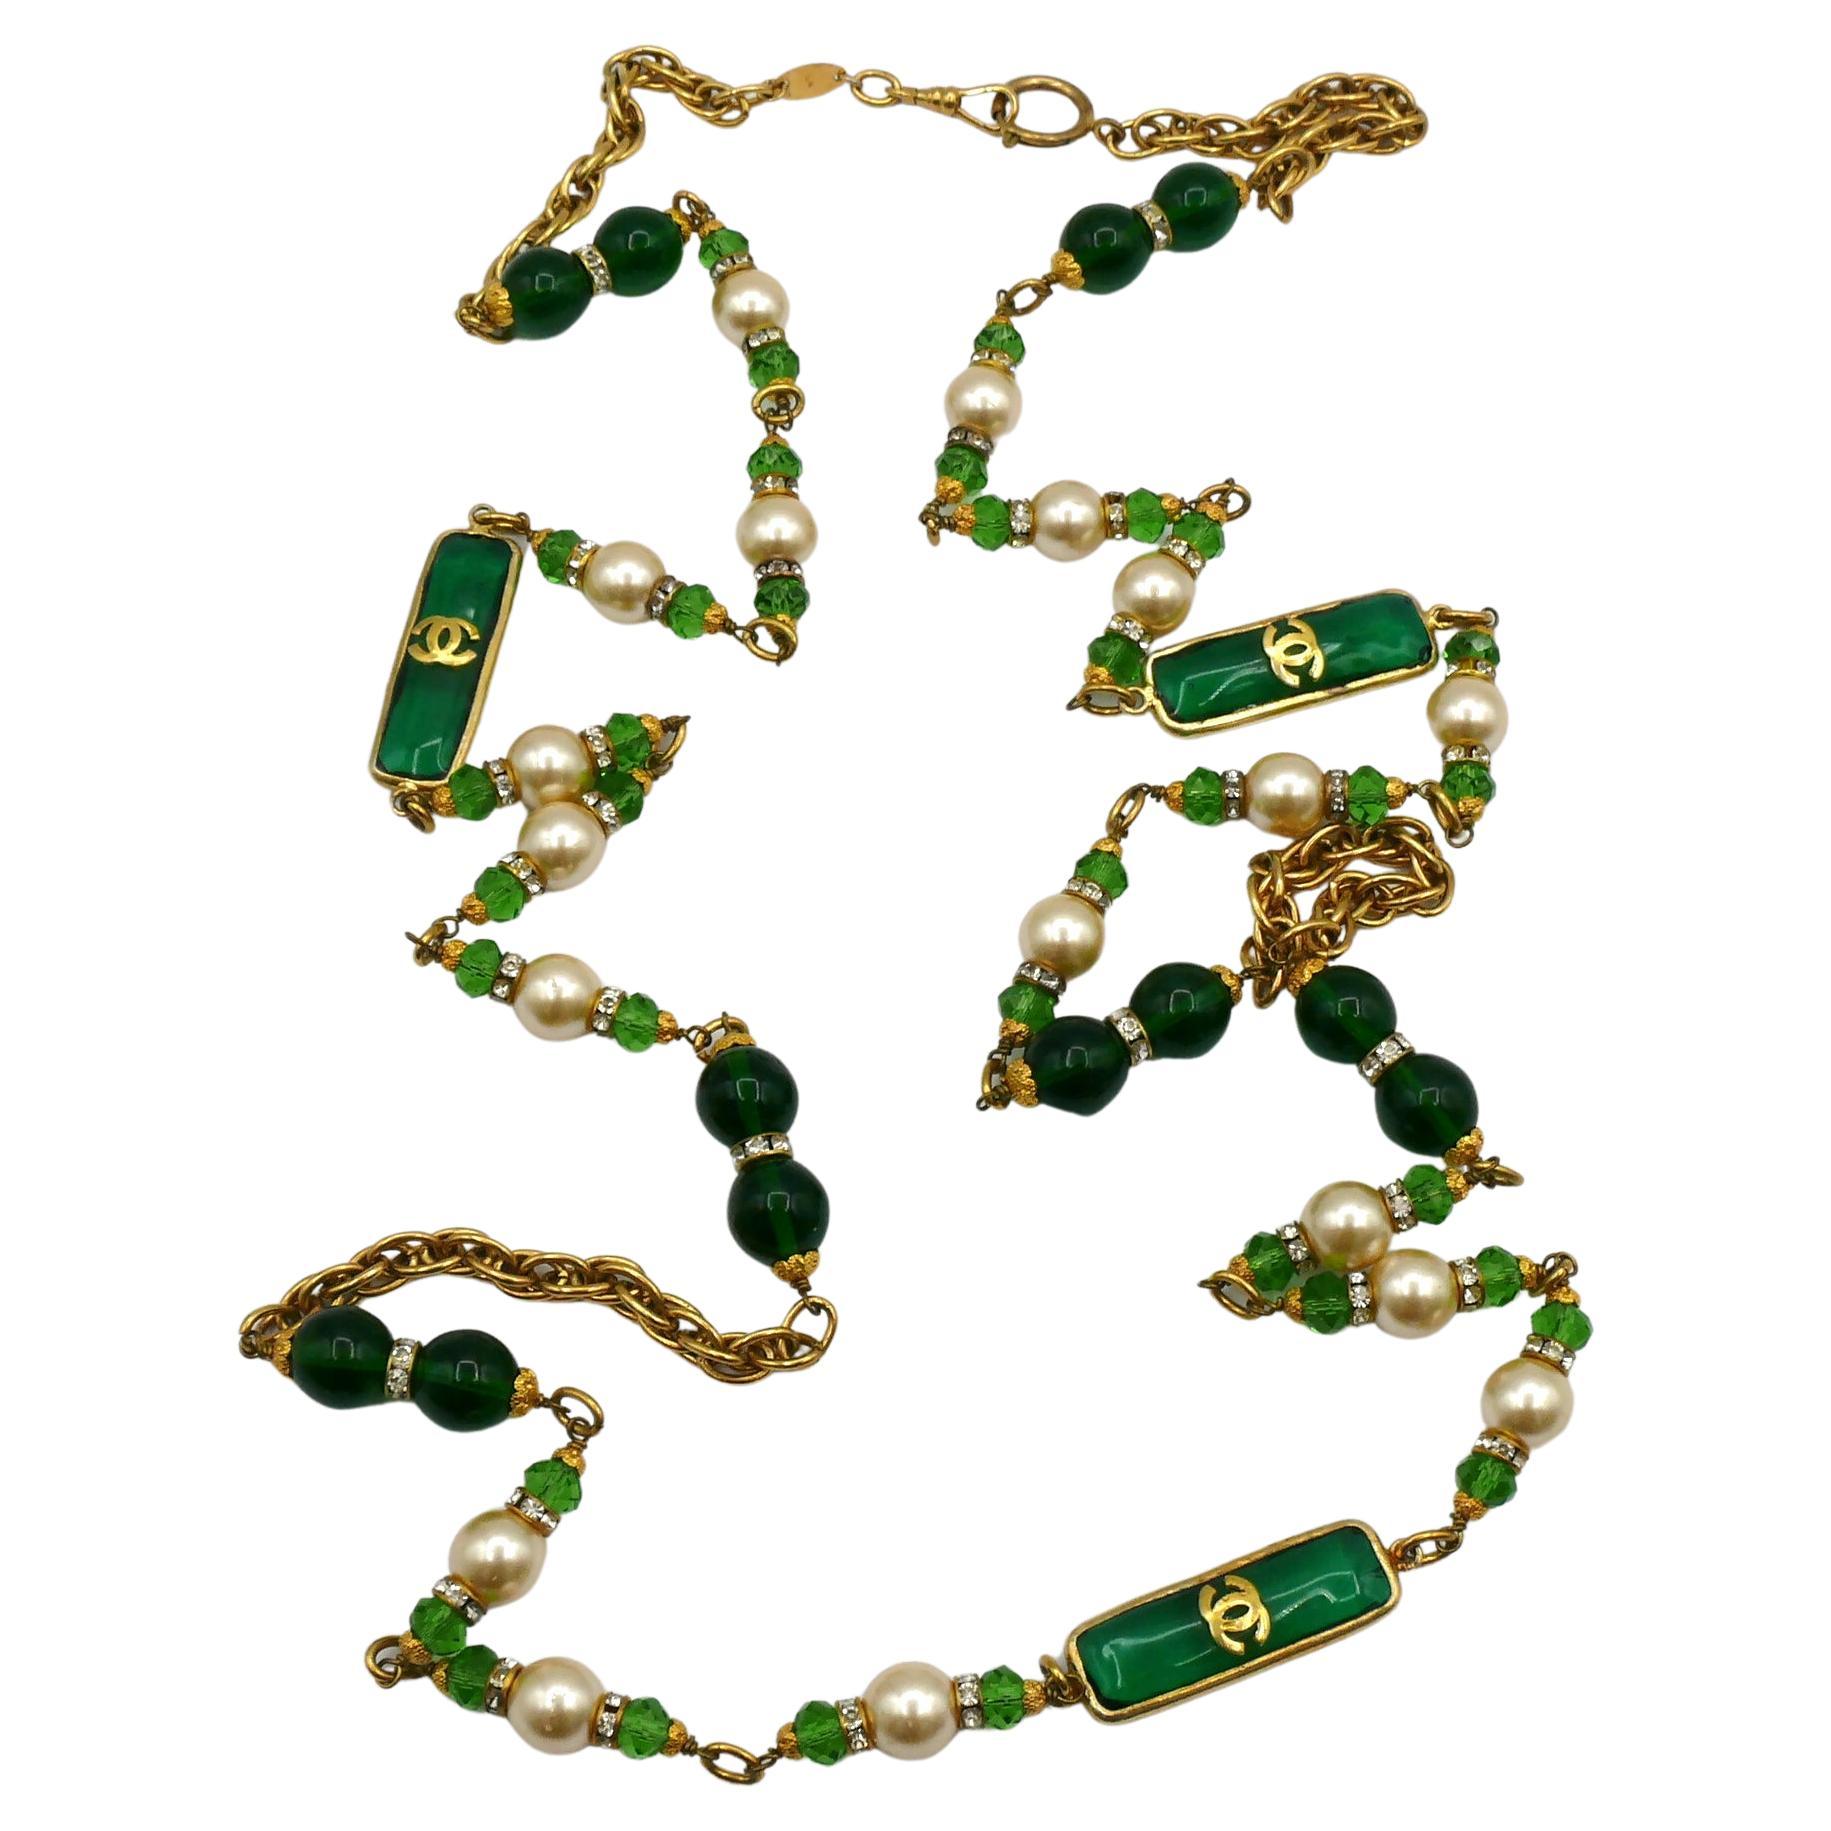 CHANEL by KARL LAGERFELD Vintage GRIPOIX Necklace, Fall 1993 For Sale